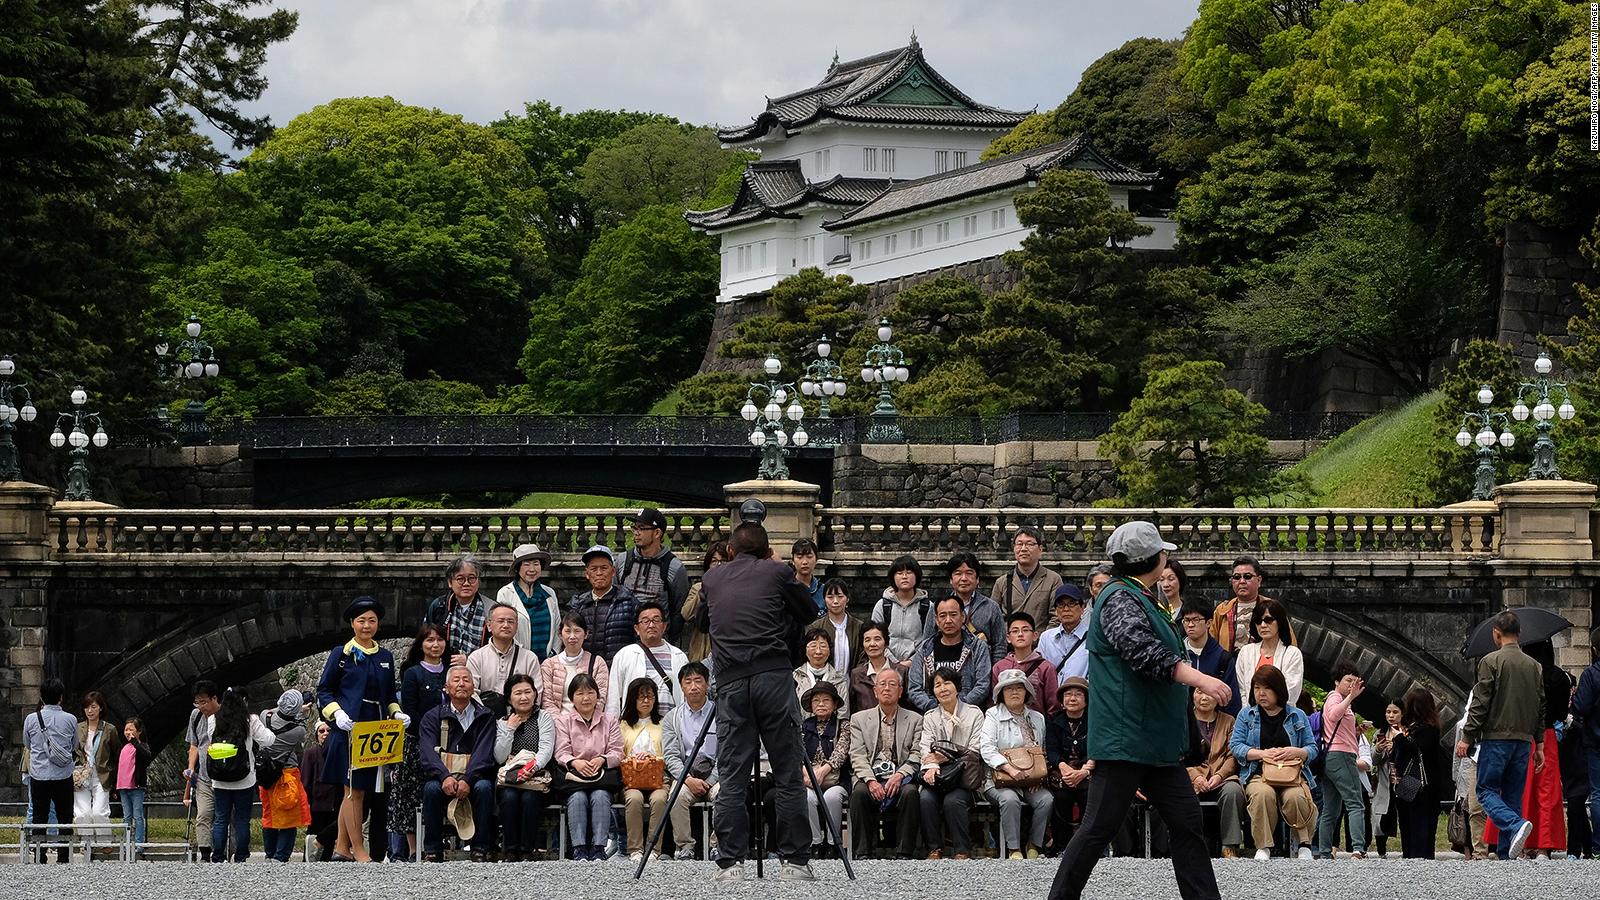 Tokyo S Imperial Palace Your Guide To Visiting Japan S Royal Residence Cnn Travel